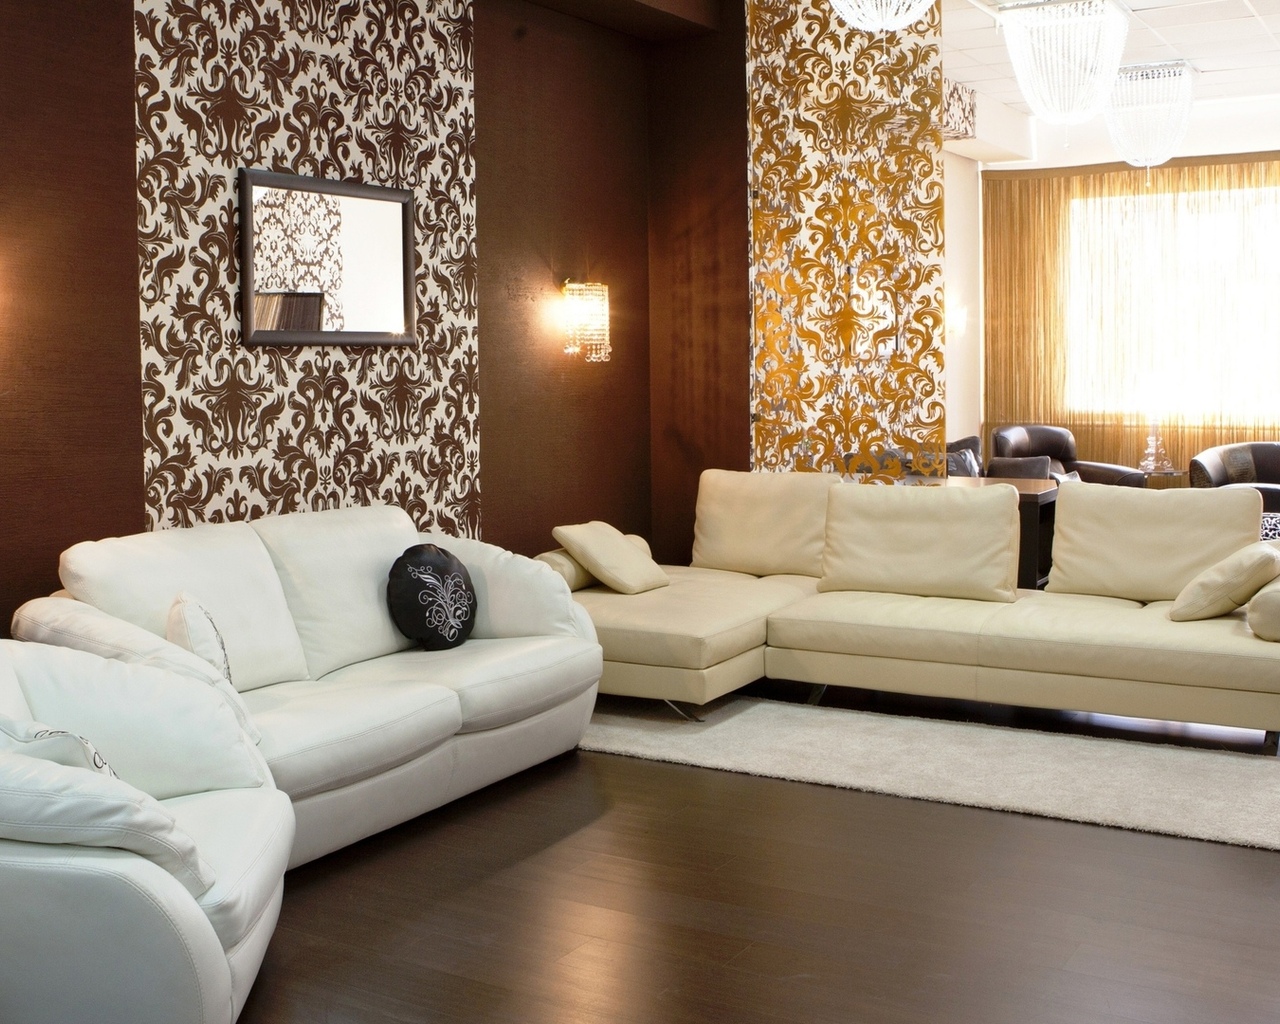 bright decor of the living room in chocolate color